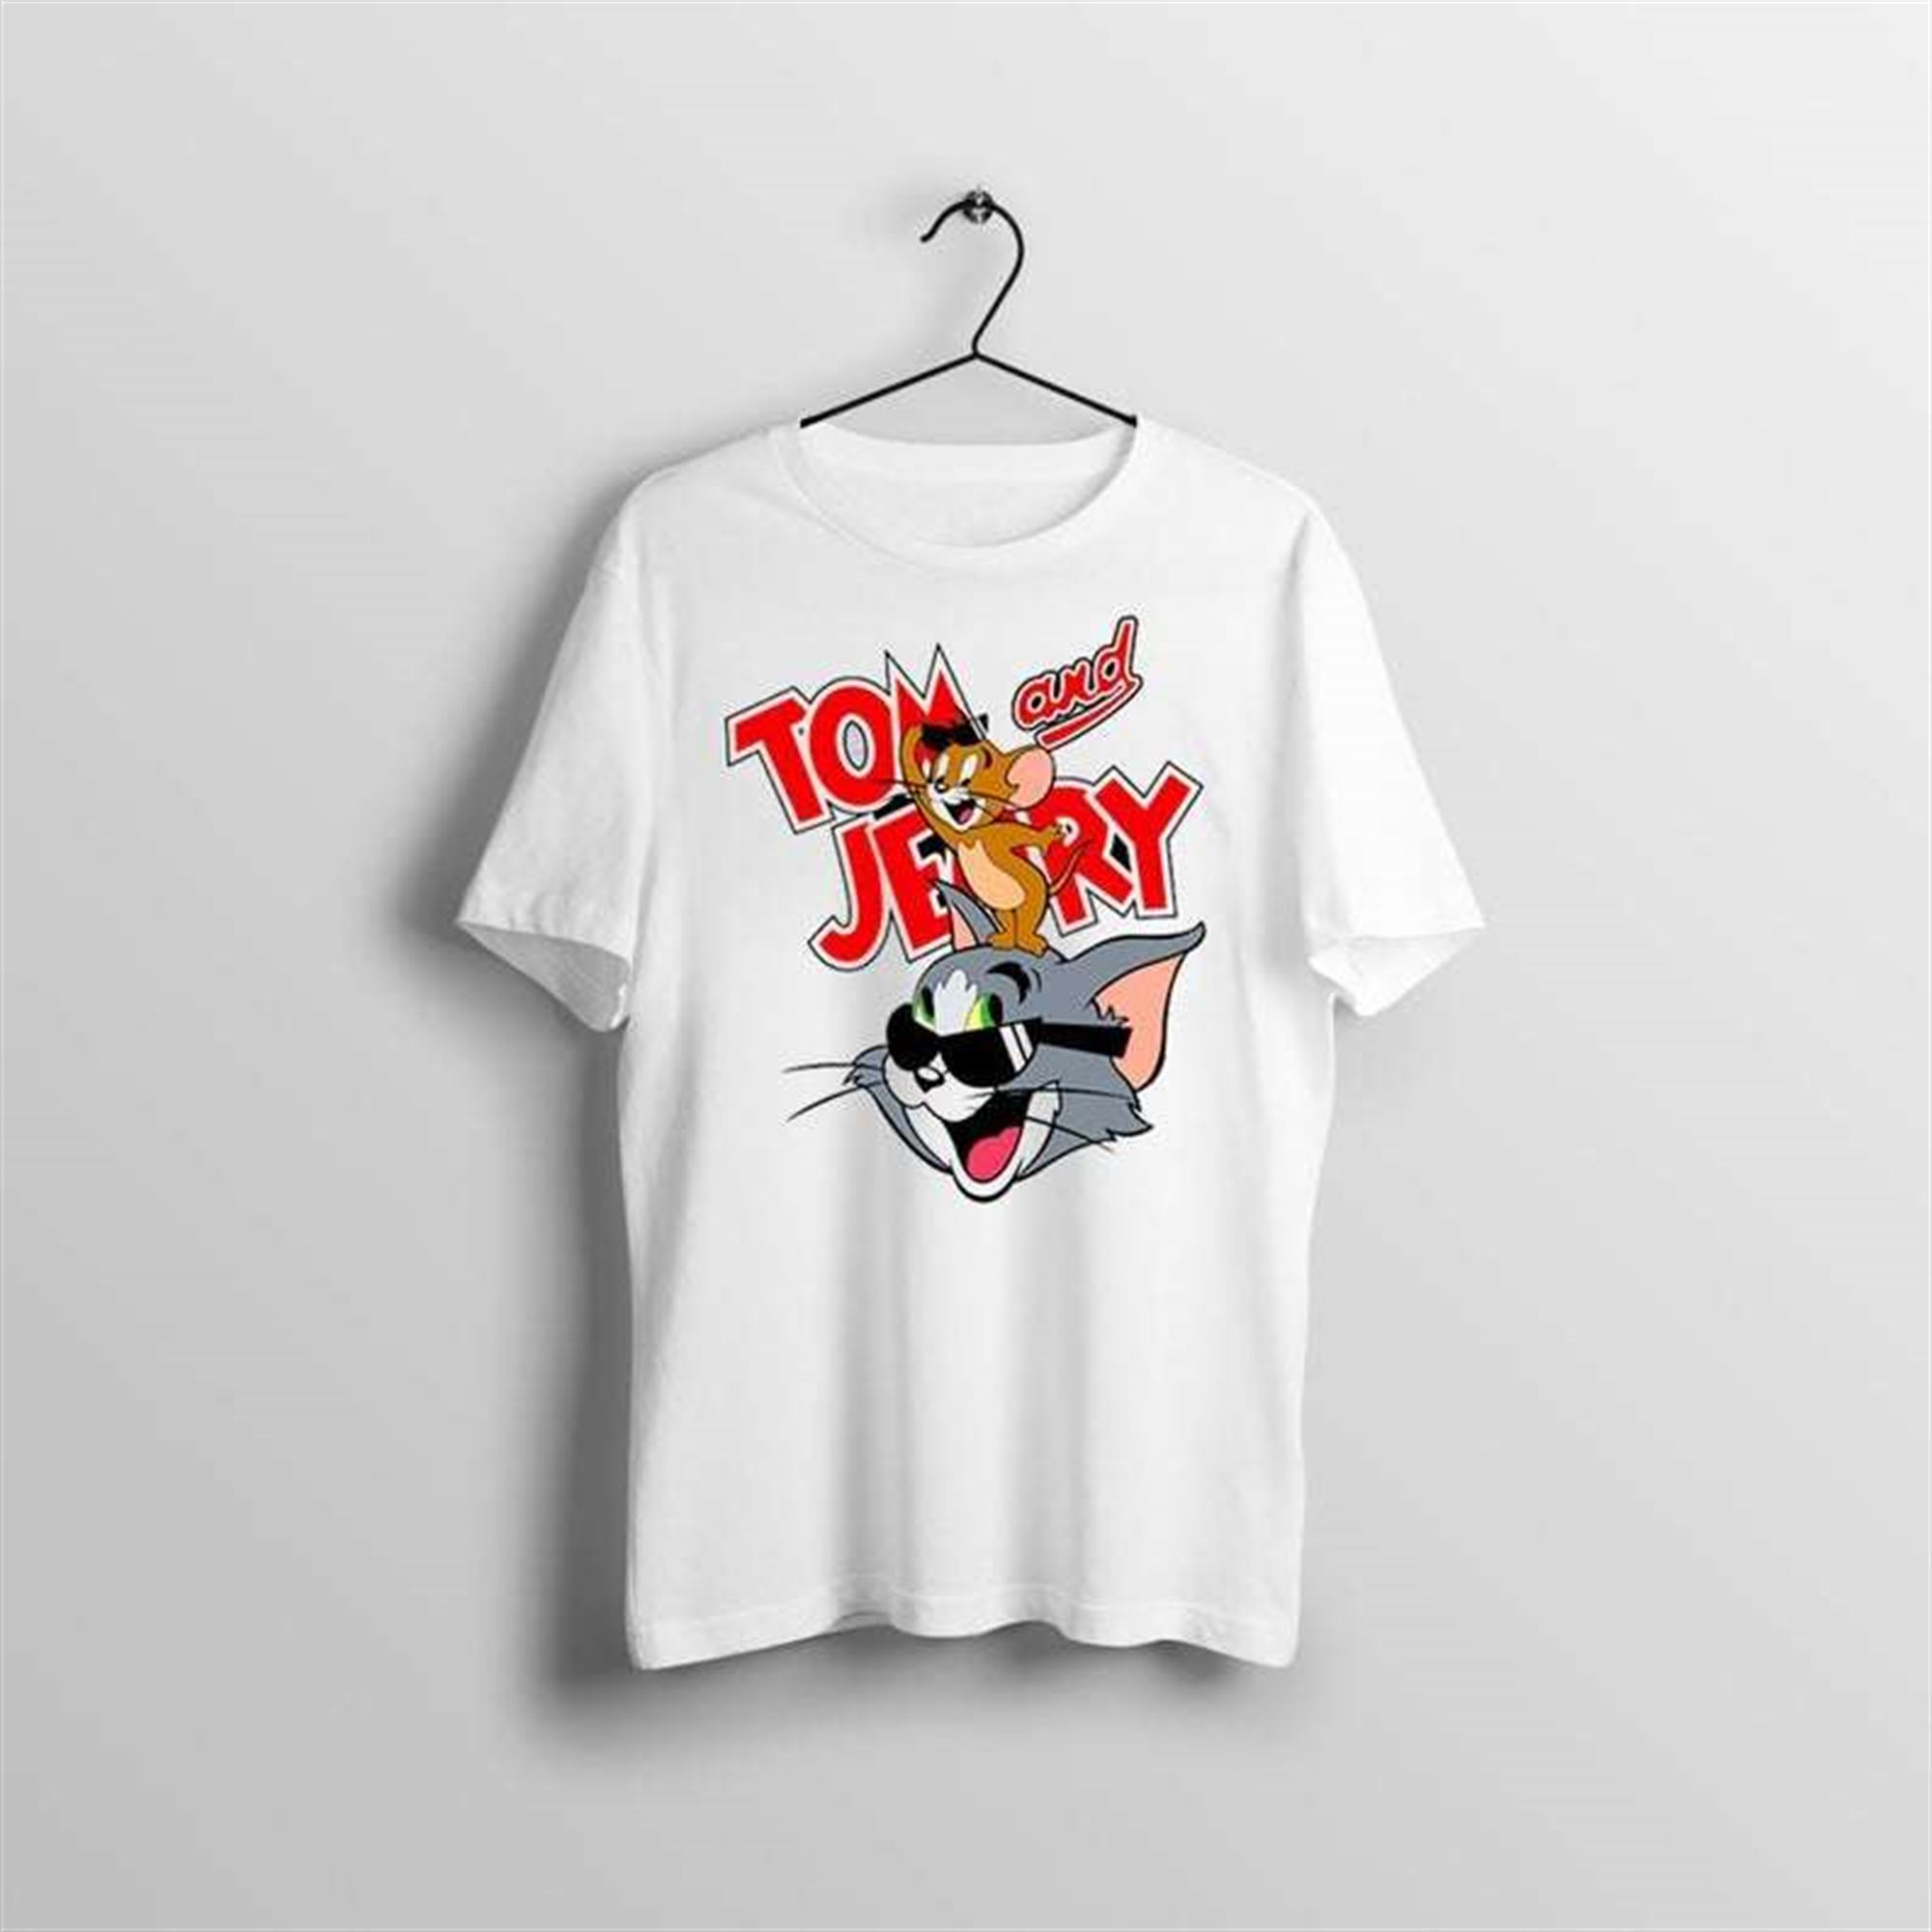 Tom And Jerry 2021 Summer T Shirt Full Size Up To 5xl